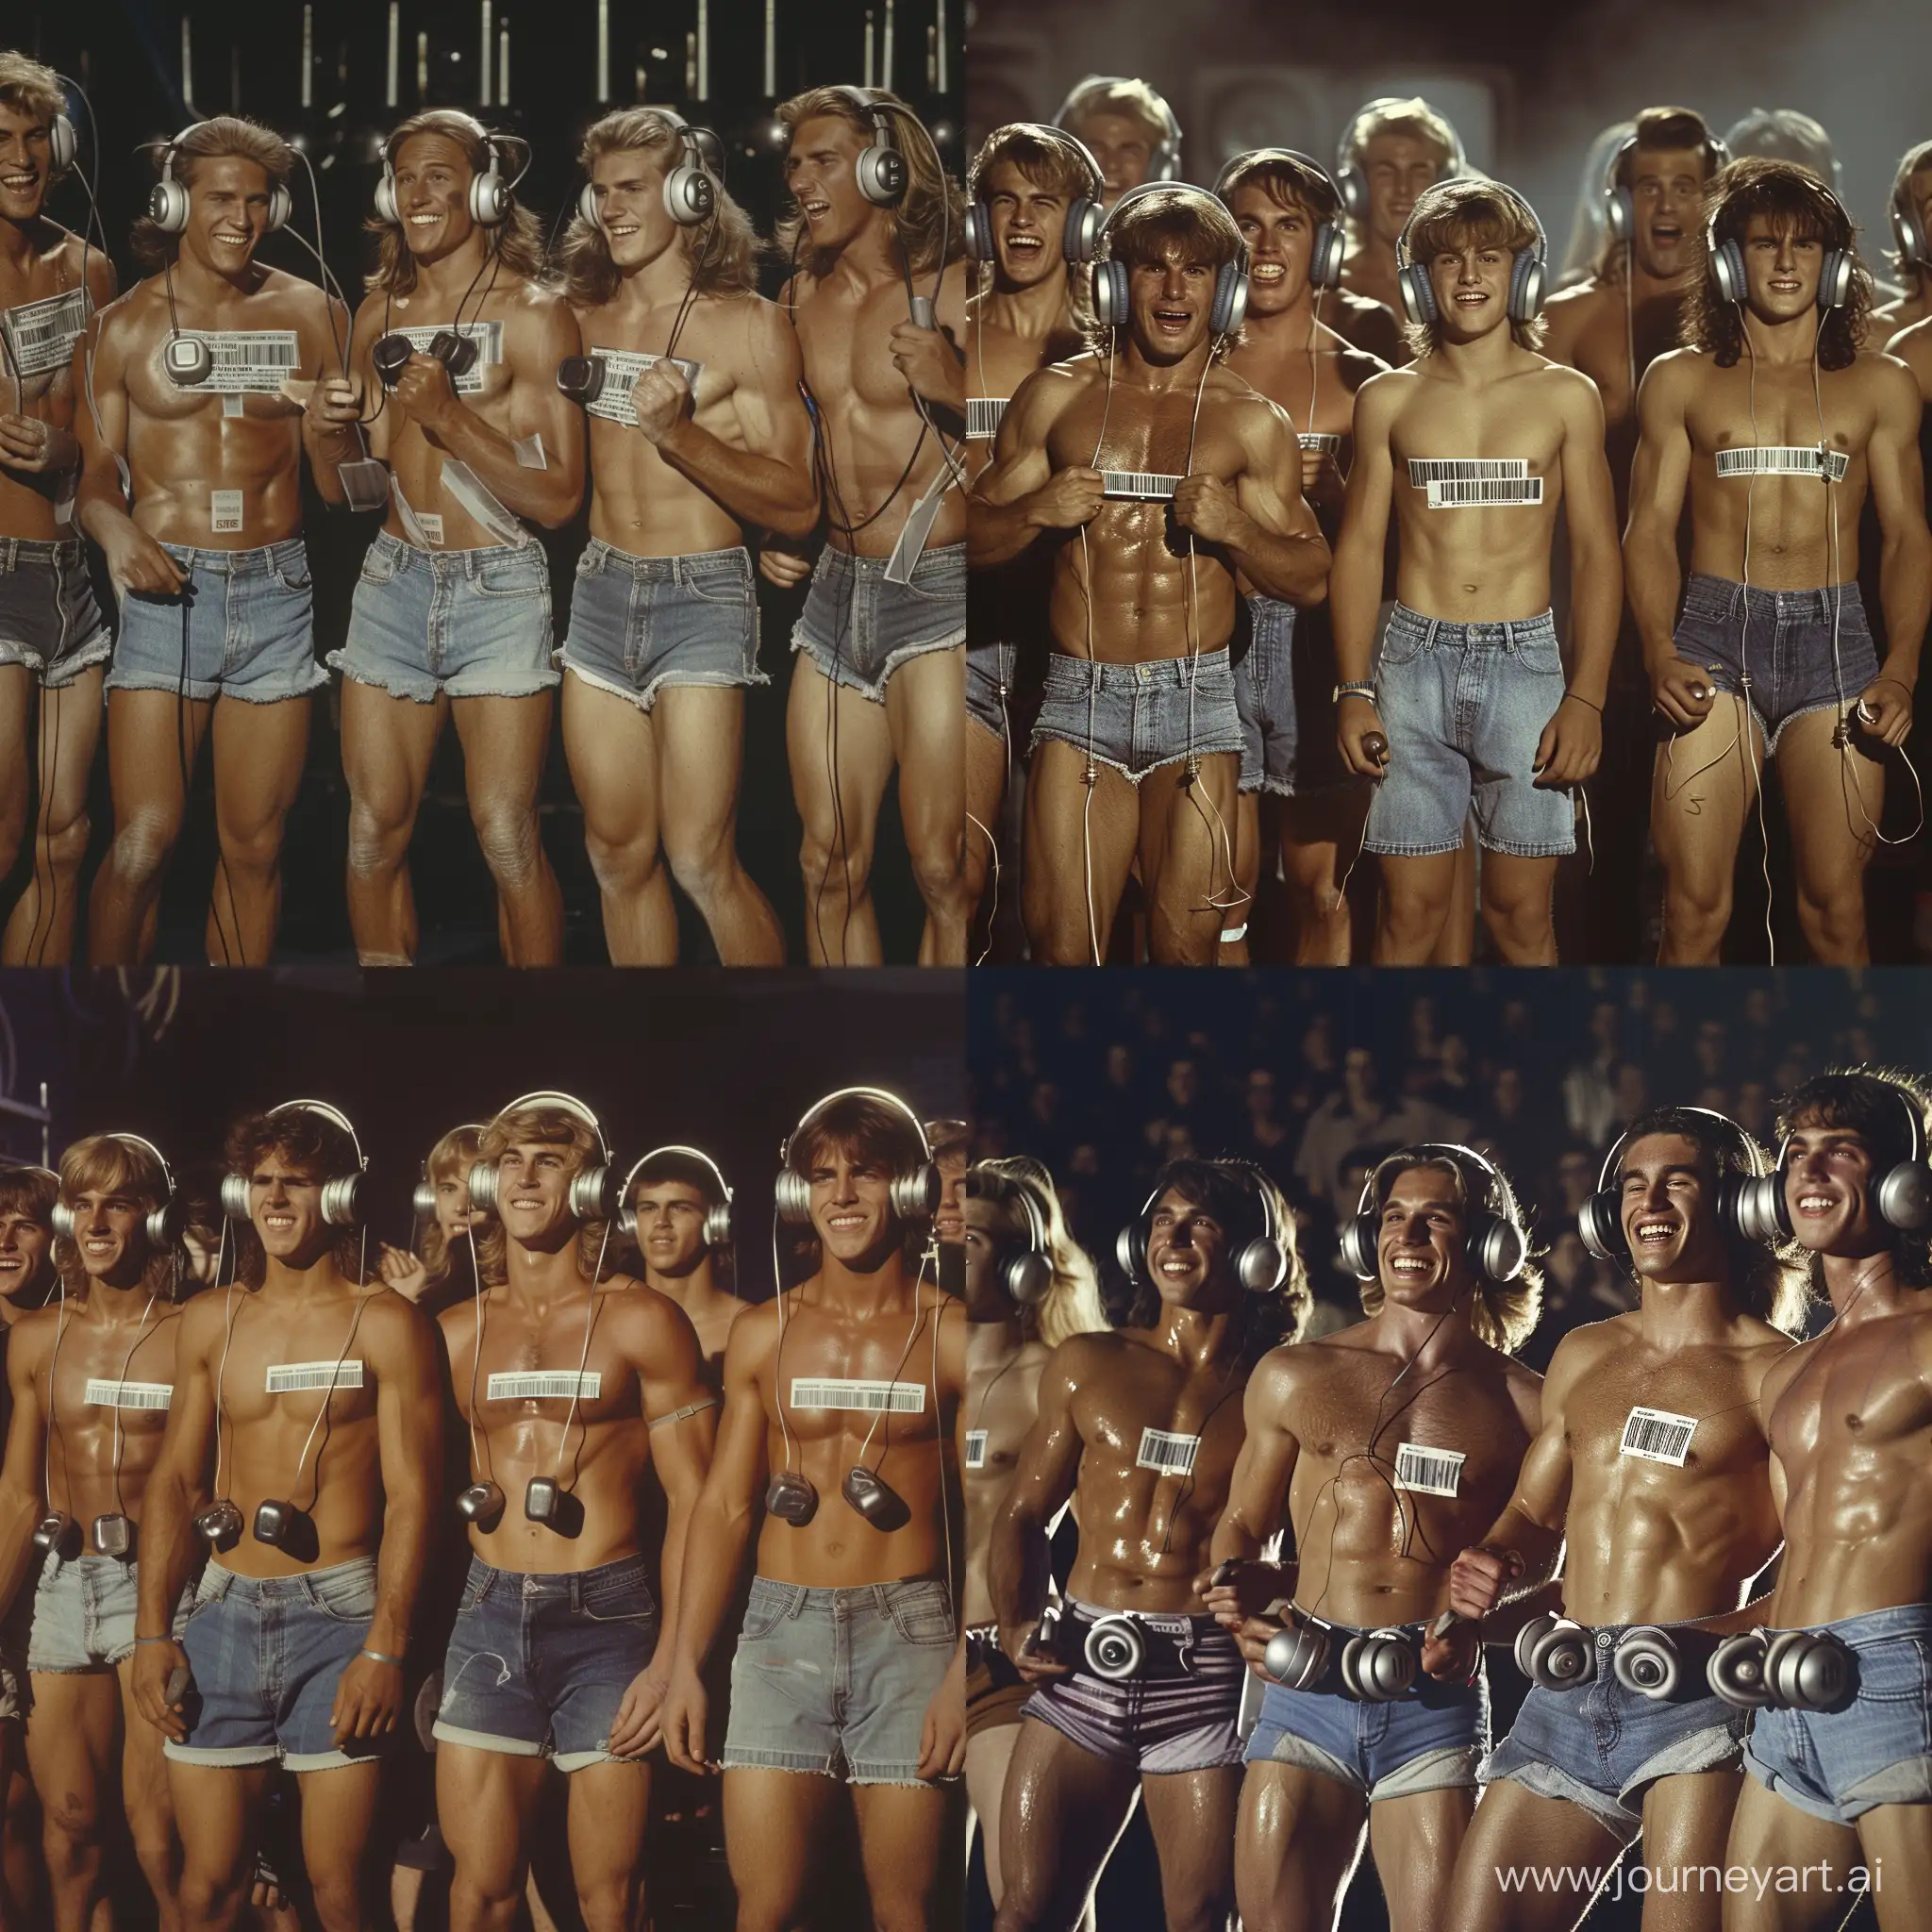 Handsome muscular middle-aged men and handsome muscular college-age boys each wear silver headphones and fitted denim cutoff shorts, dazed smiles, small barcode attached to each man's chest, 1980s rock concert setting, long hair, facing the viewer, mass indoctrination, color image, hyperrealistic, cinematic